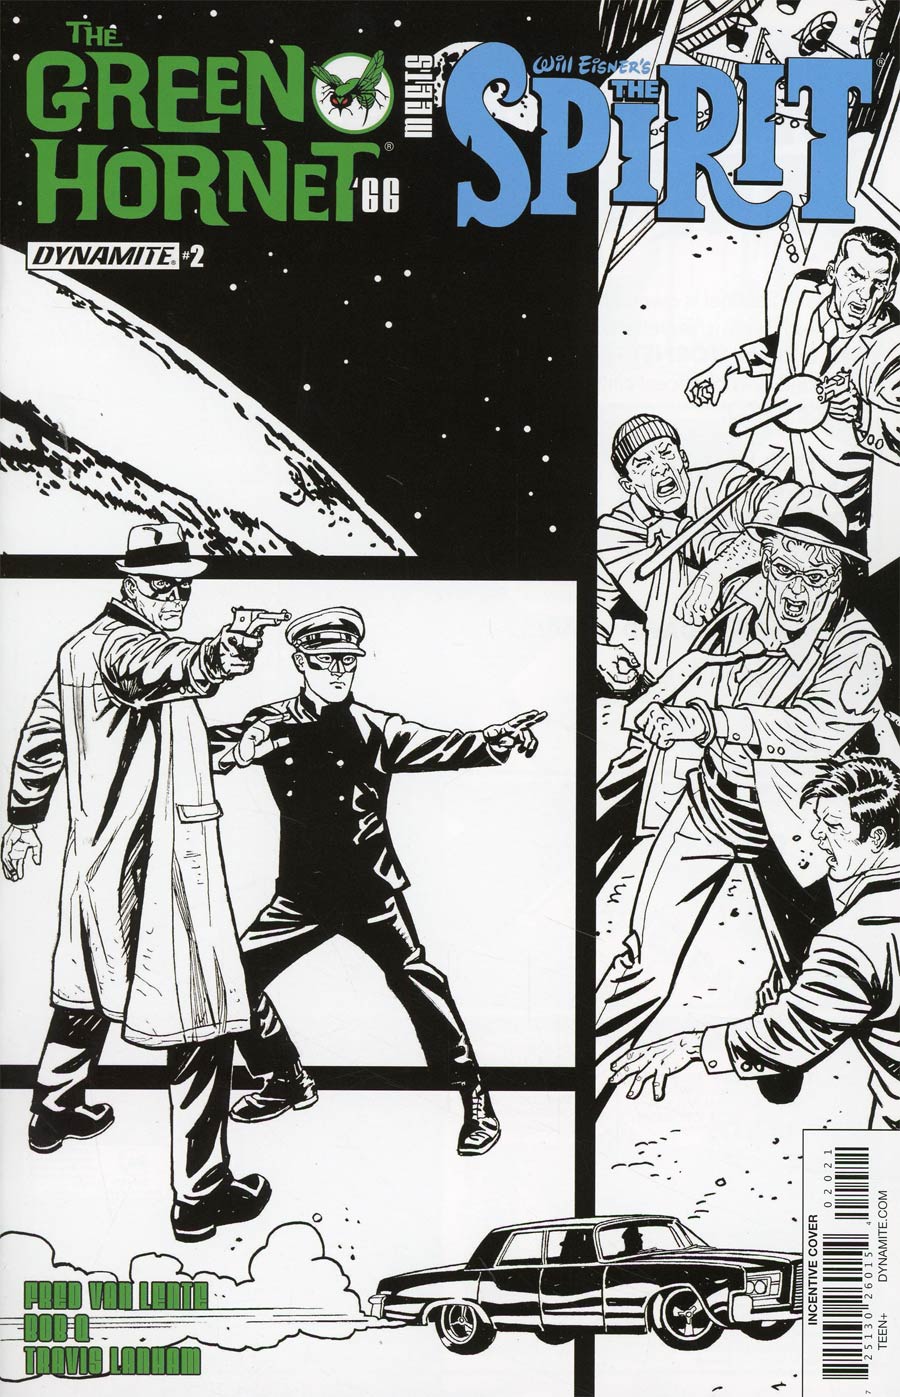 Green Hornet 66 Meets The Spirit #2 Cover B Incentive Ty Templeton Black & White Cover